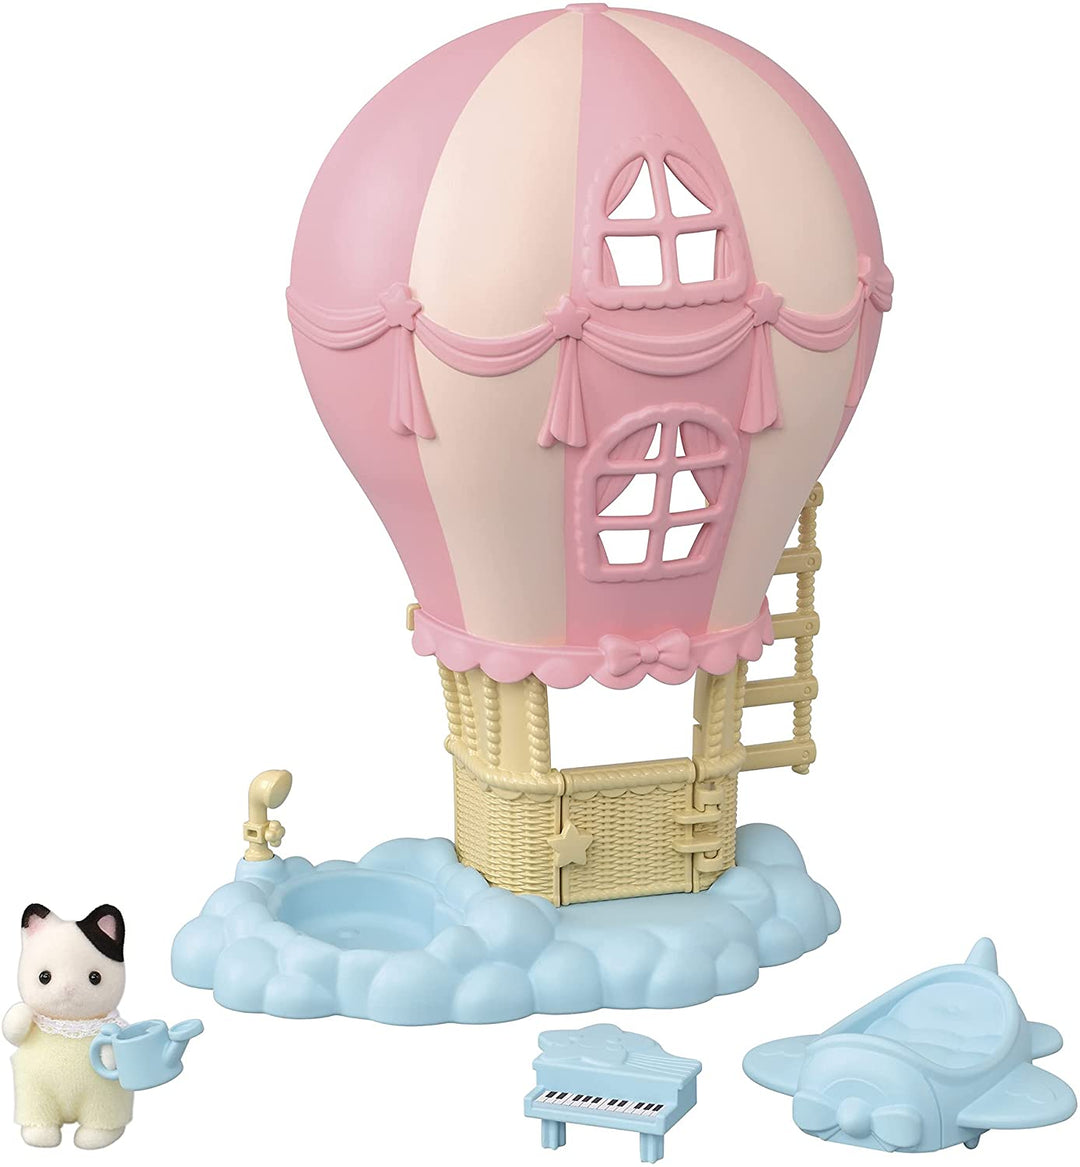 Sylvanian Families 5527 Baby Balloon Playhouse – Puppenhaus-Spielsets, mehrfarbig